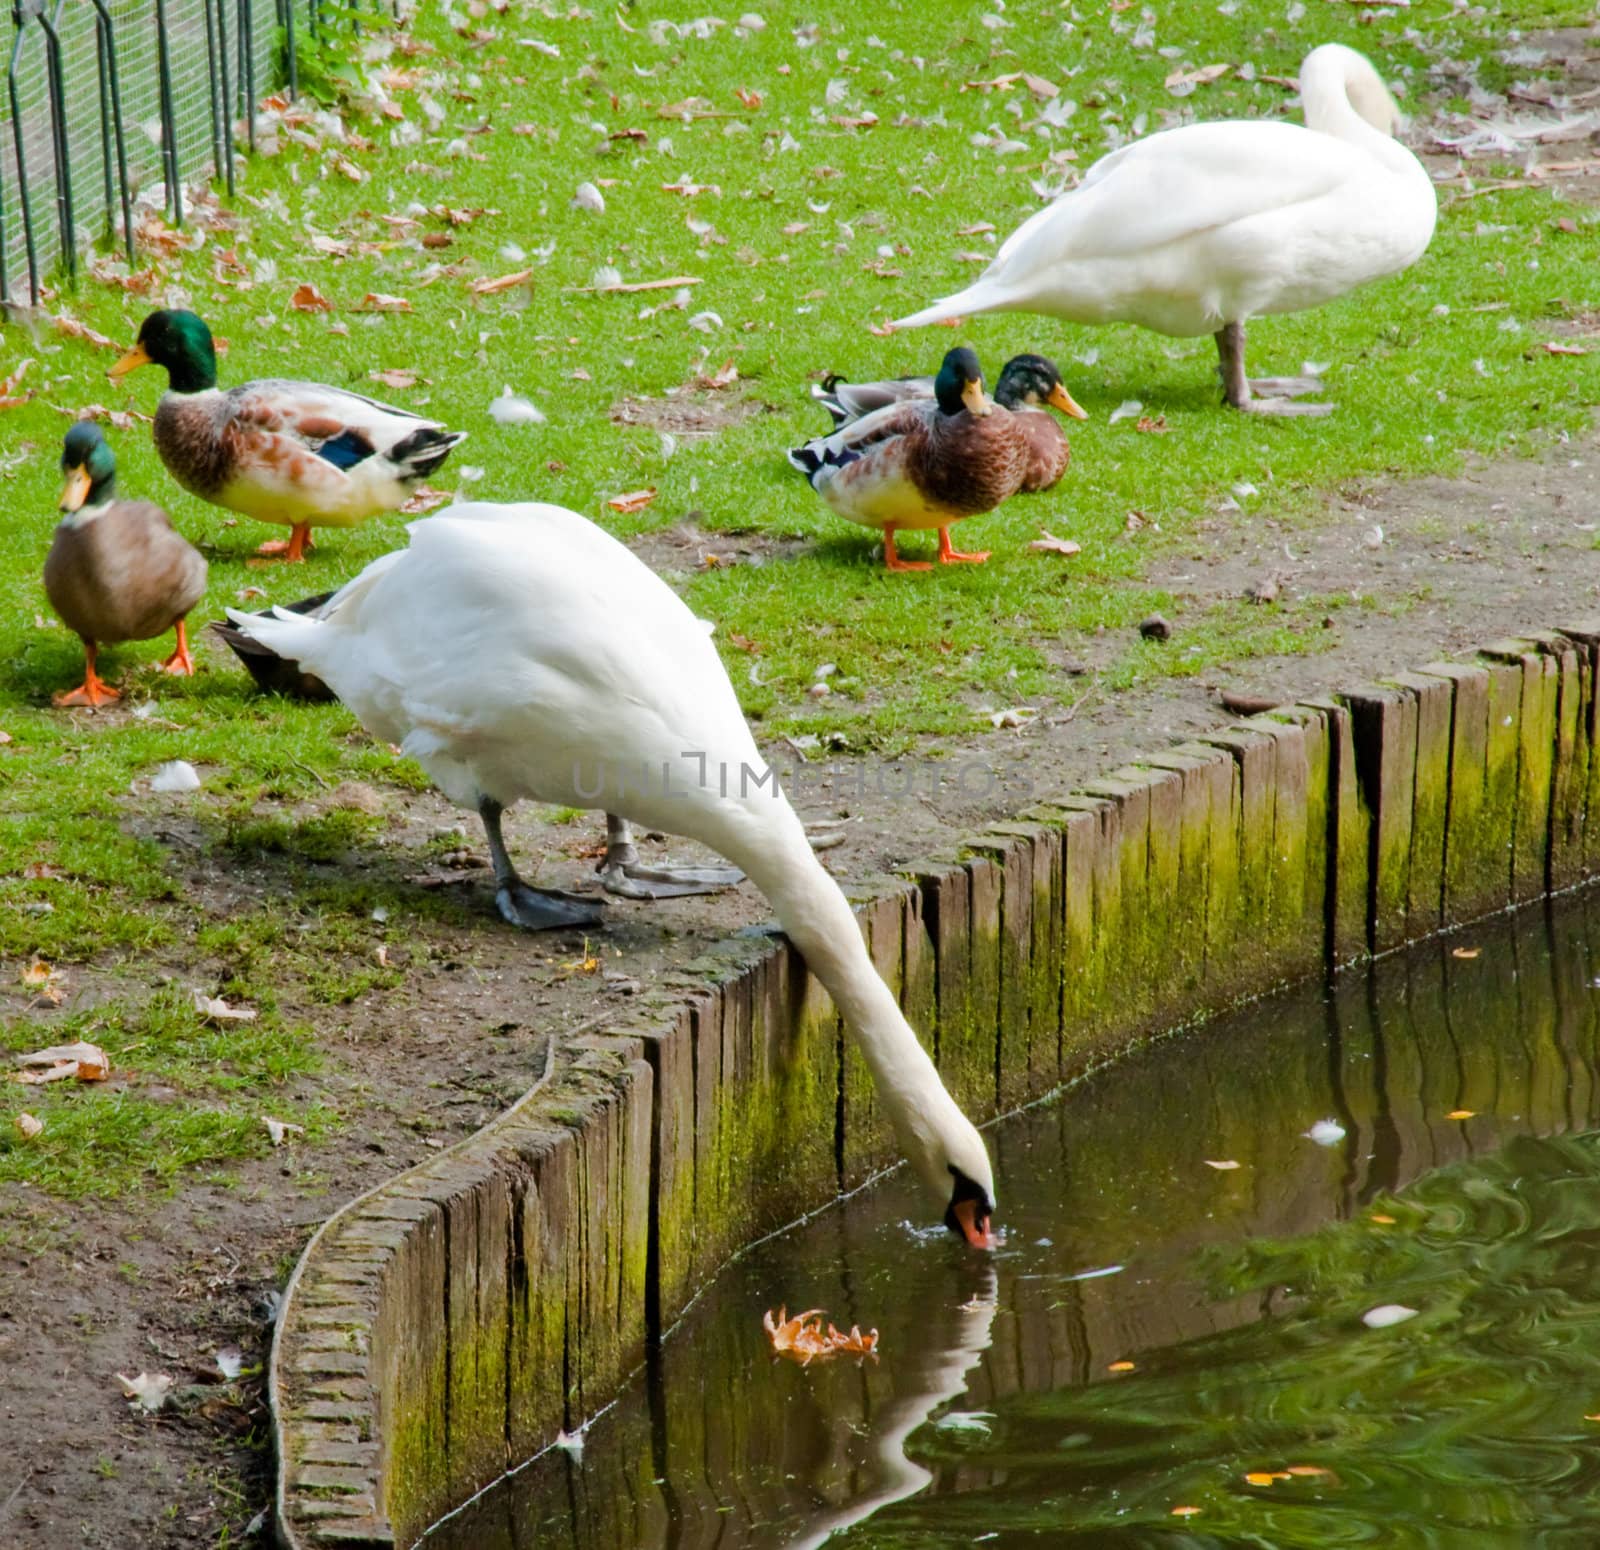 Swans and ducks in Bruges park